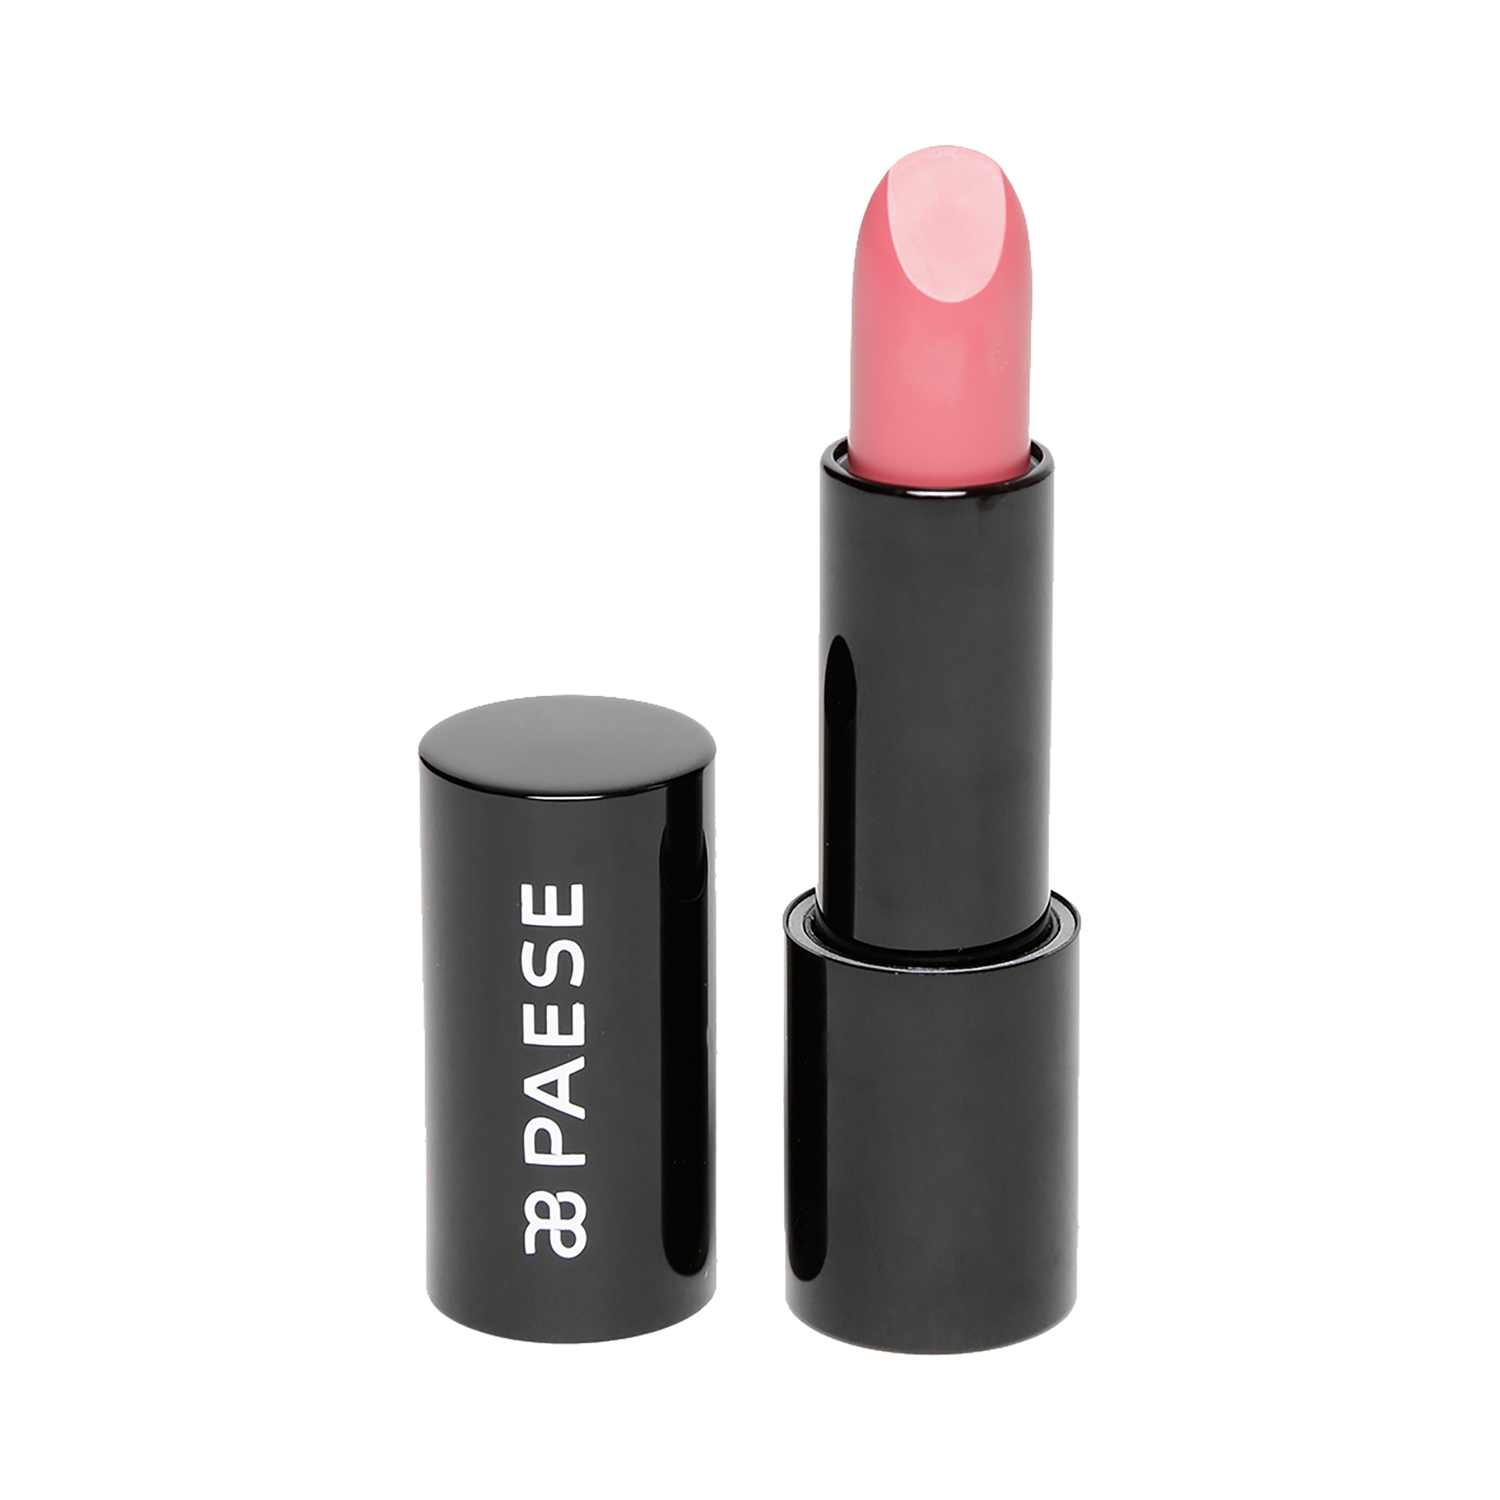 Paese Cosmetics | Paese Cosmetics Lipstick with Argan Oil - 24 Shade (4.3g)